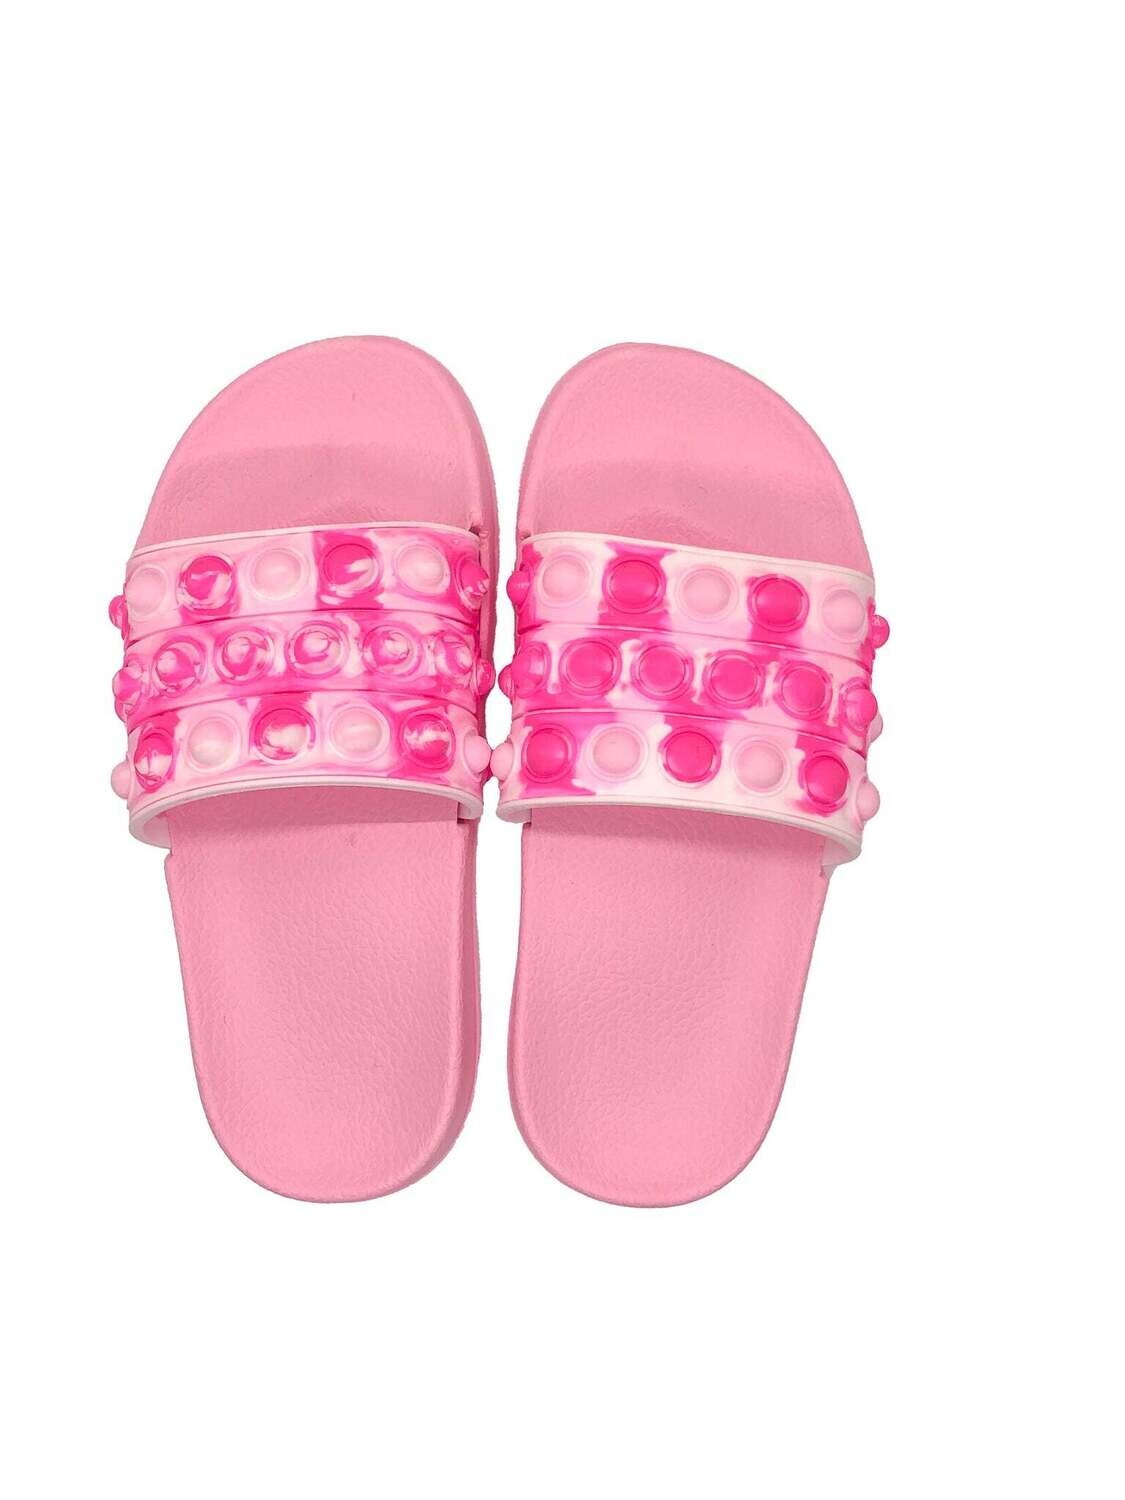 In and Out Slides - Pink Glitter